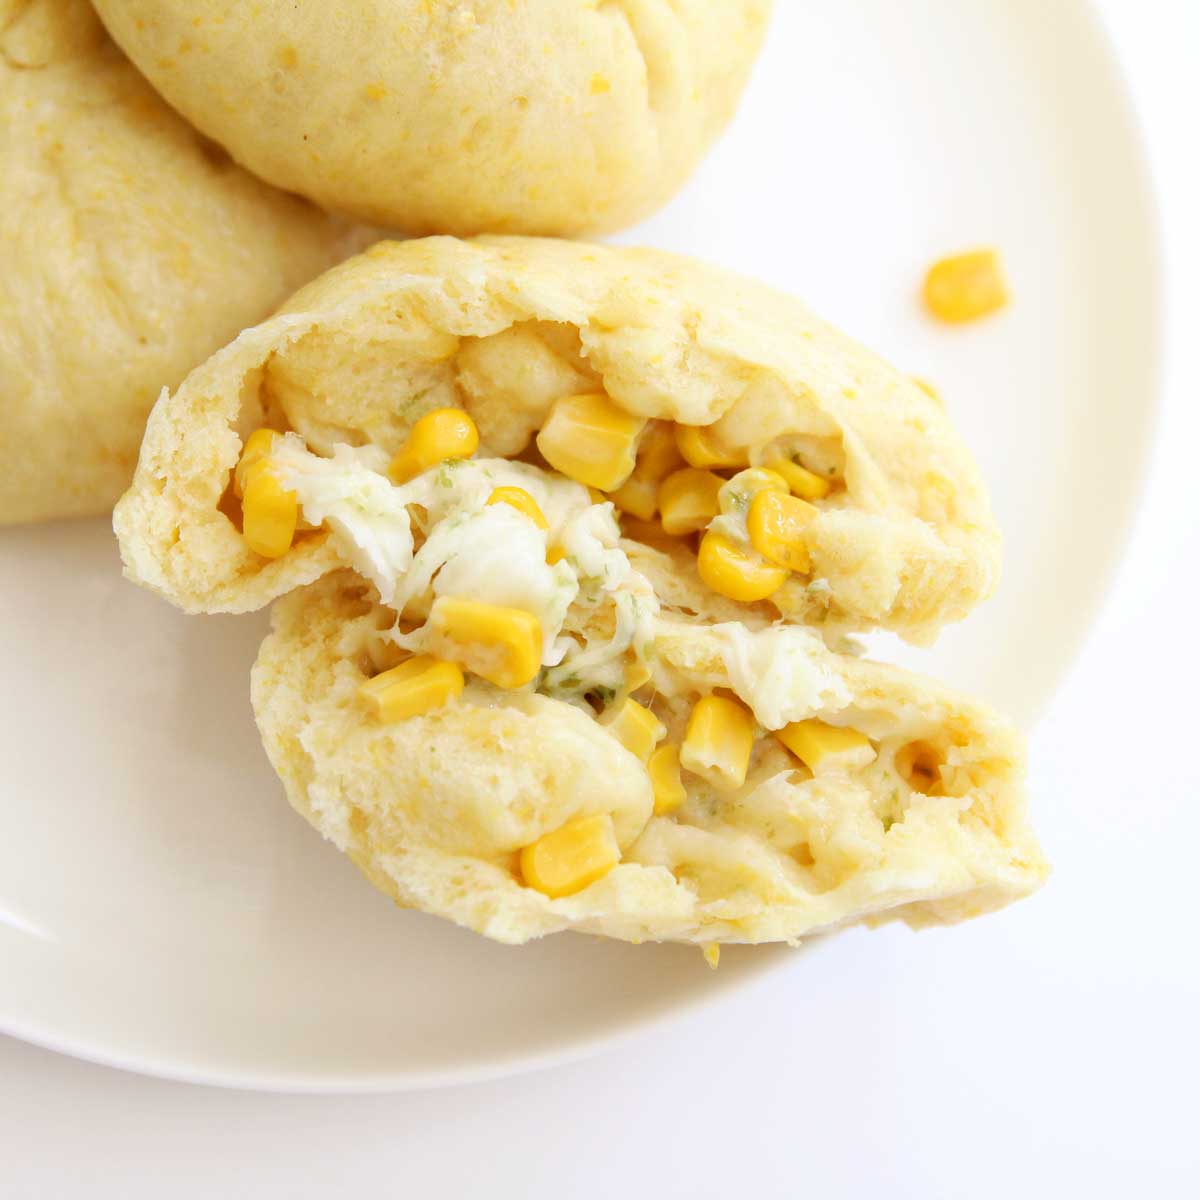 Savory "Cornbread" Steamed Buns with a Korean Cheese Corn Filling - Roasted Corn Naan